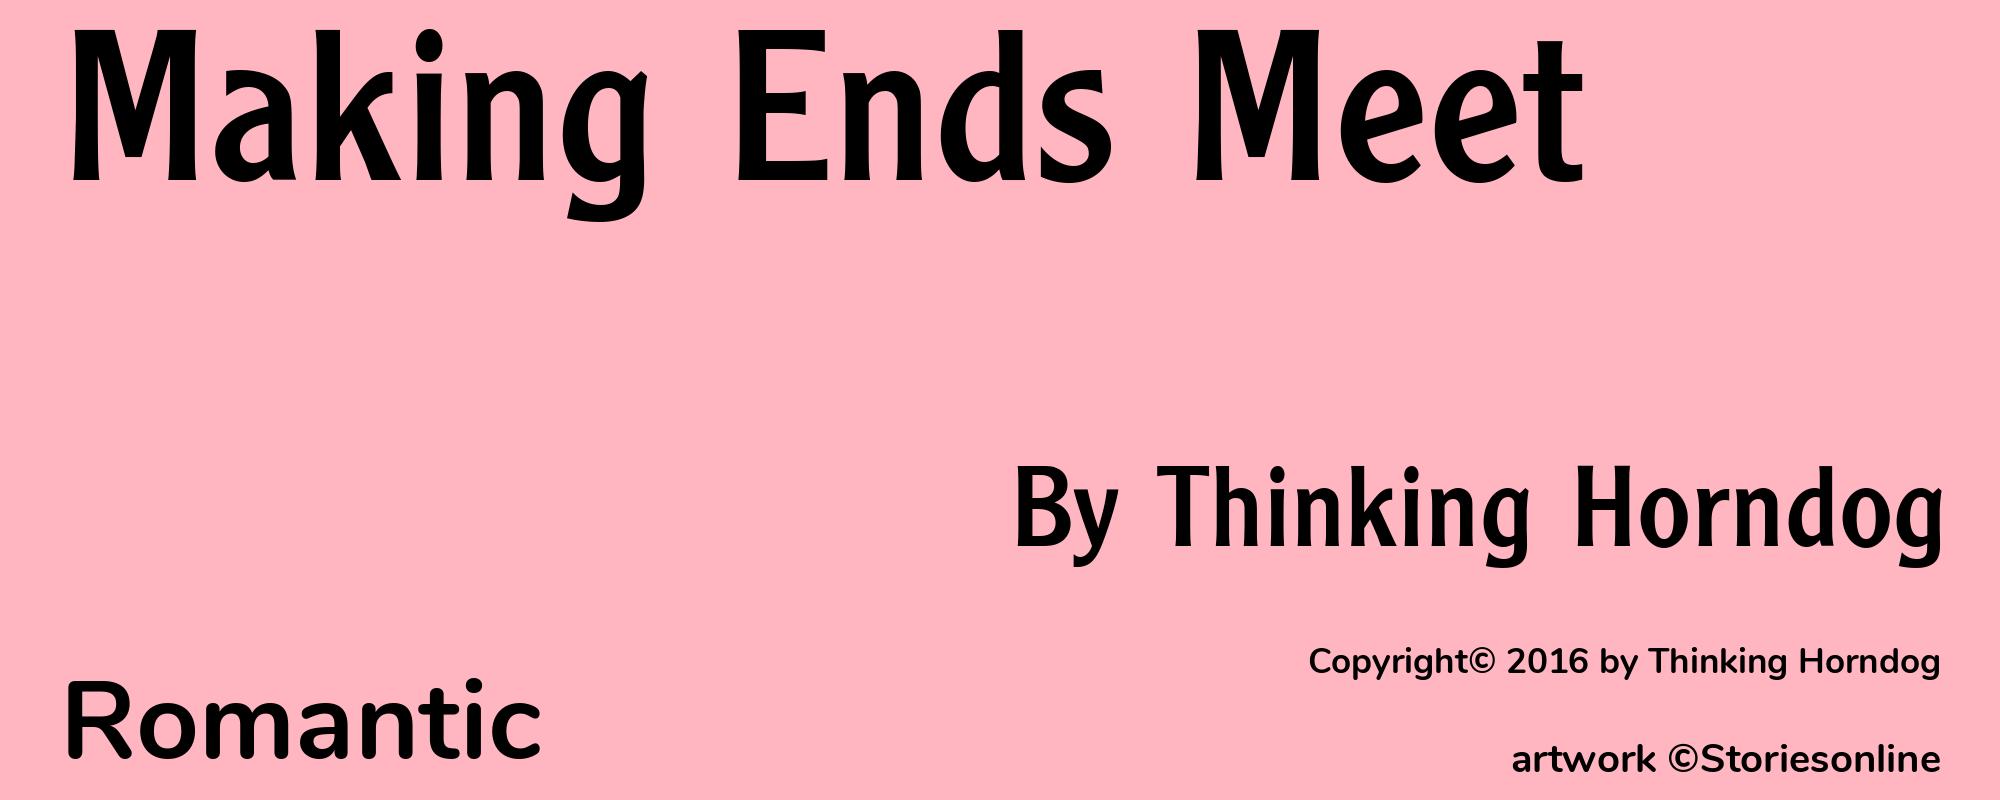 Making Ends Meet - Cover